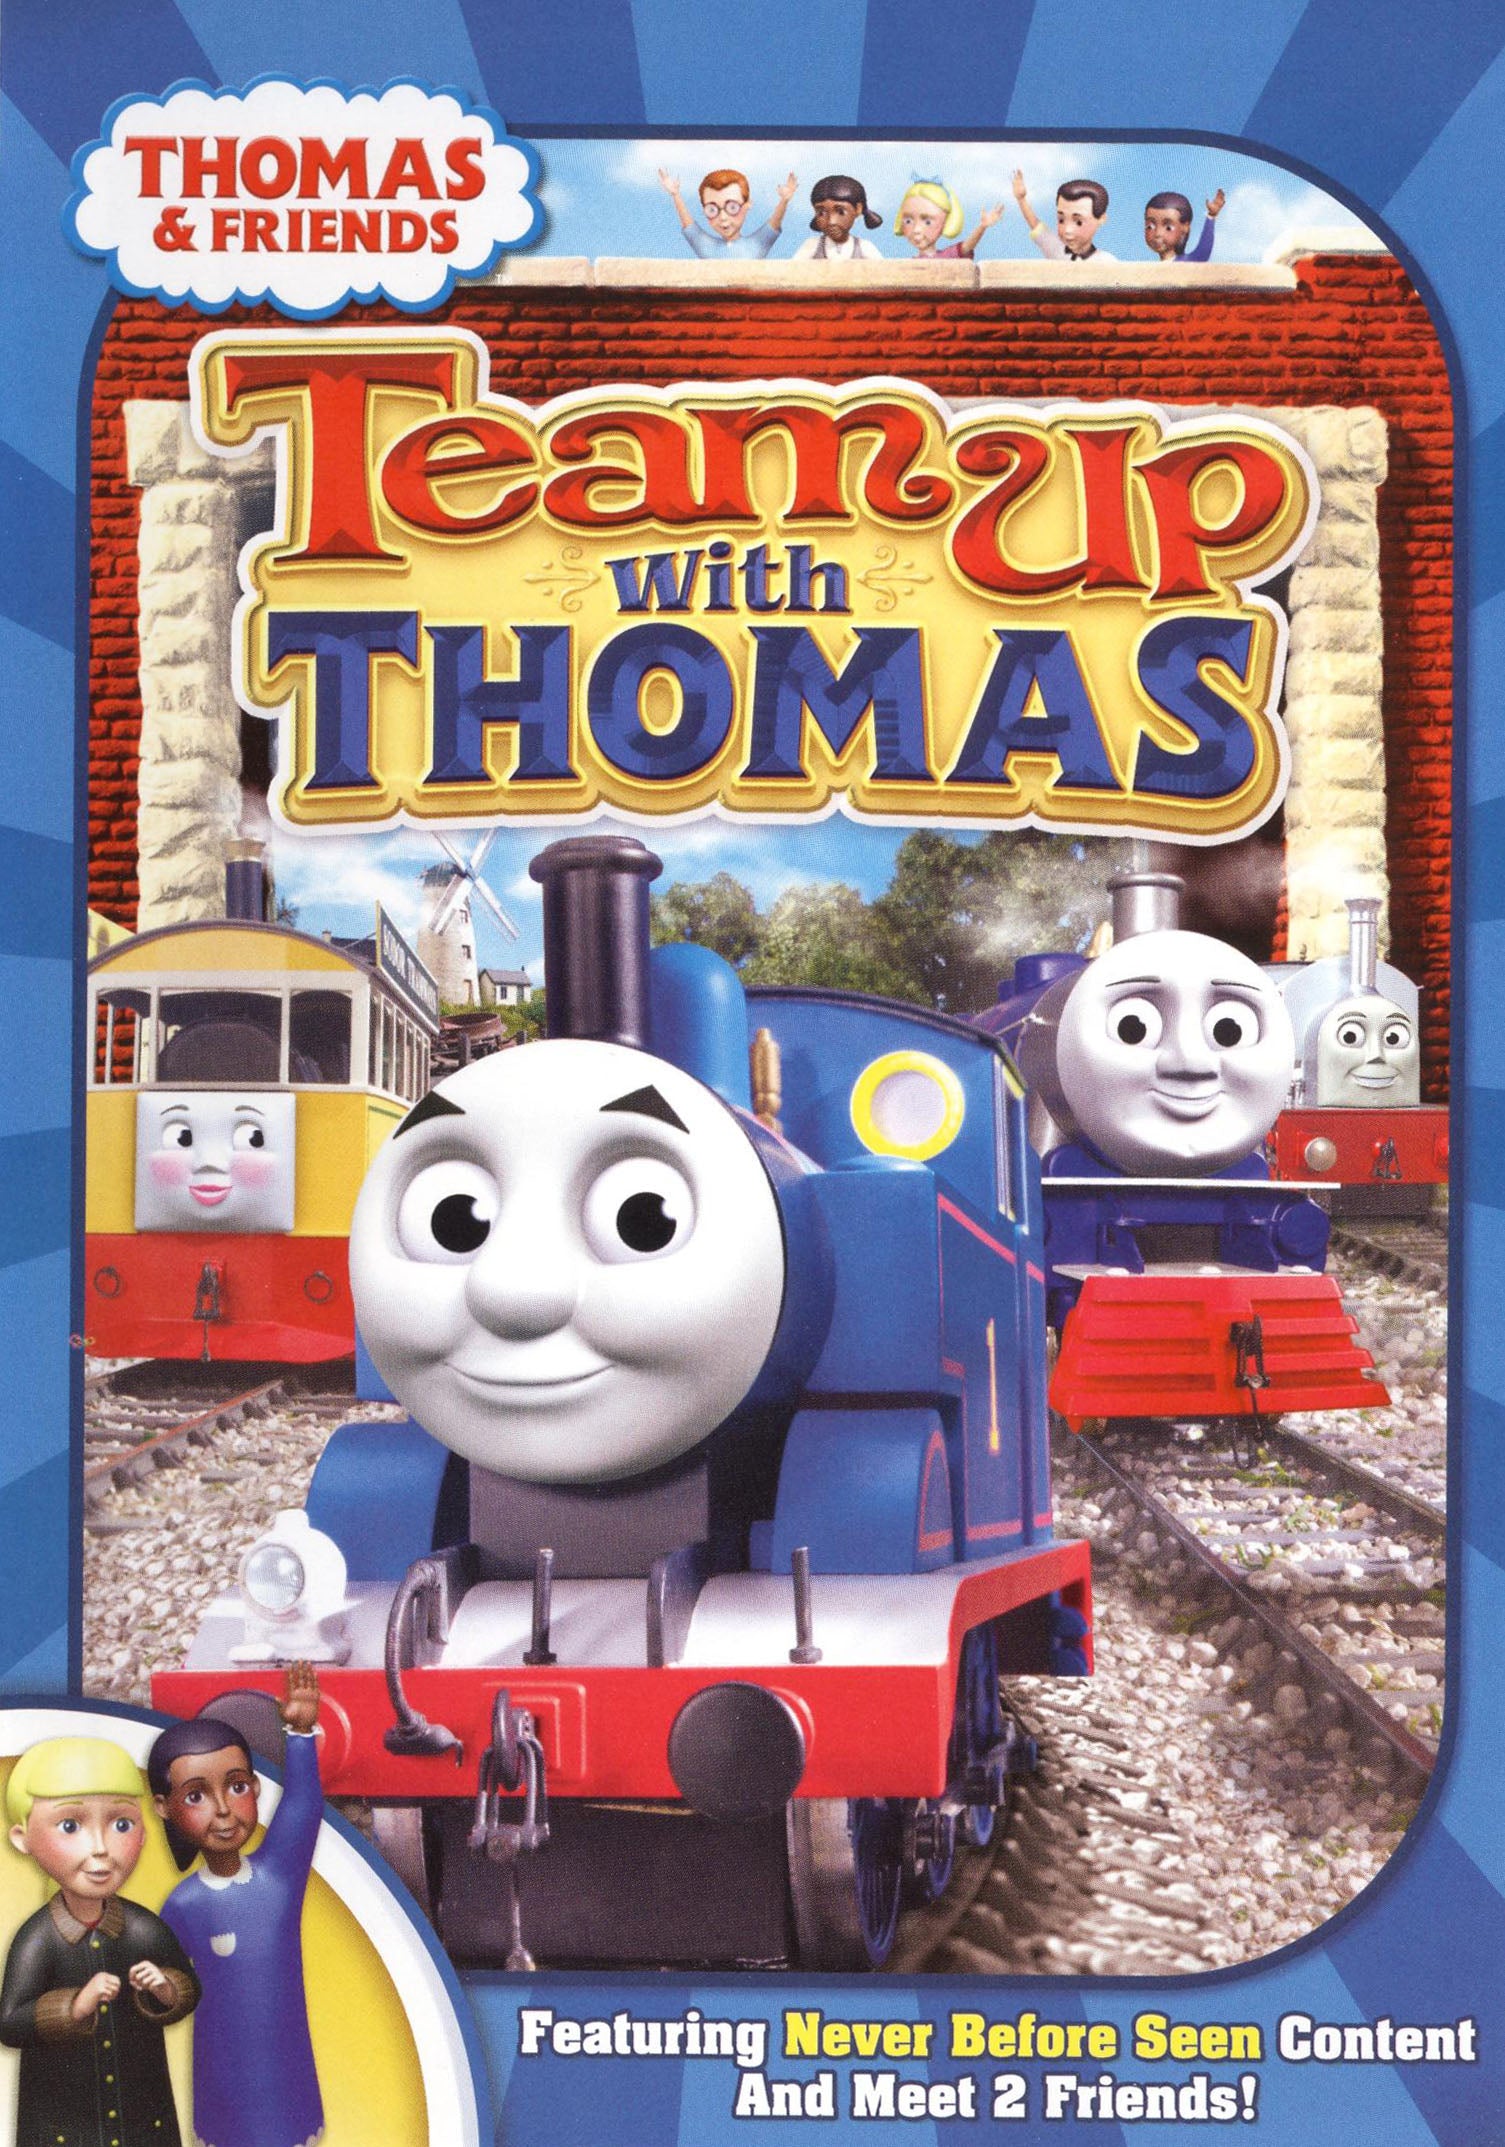 Thomas & Friends:Team Up with Thomas cover art